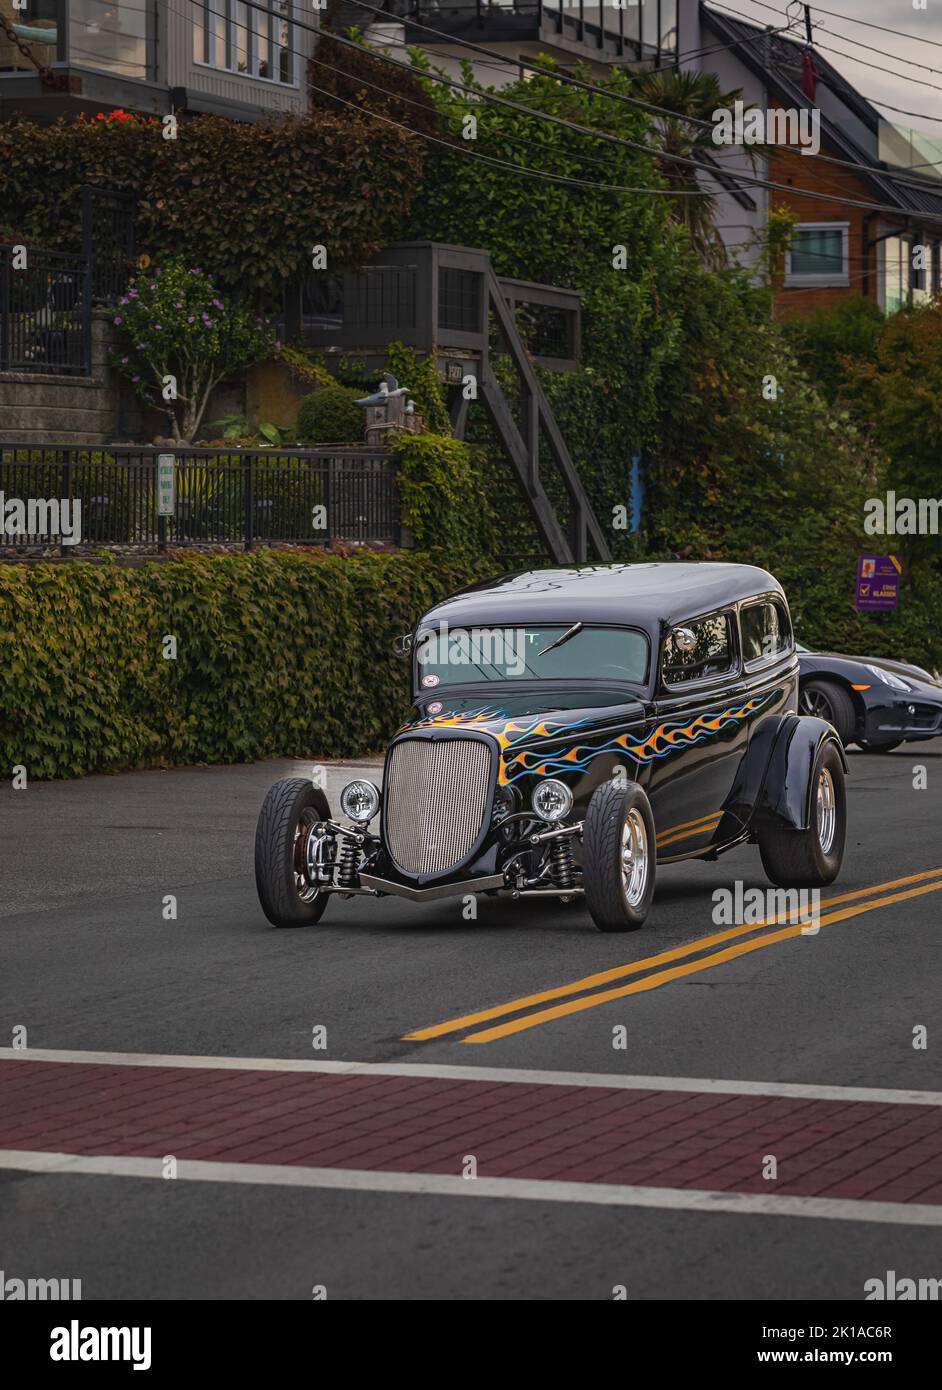 A 1933 Ford roadster at the rally car shows. Vintage Ford highboy hot rod driving in the downtown White Rock BC Canada-September 15,2022. Travel photo Stock Photo